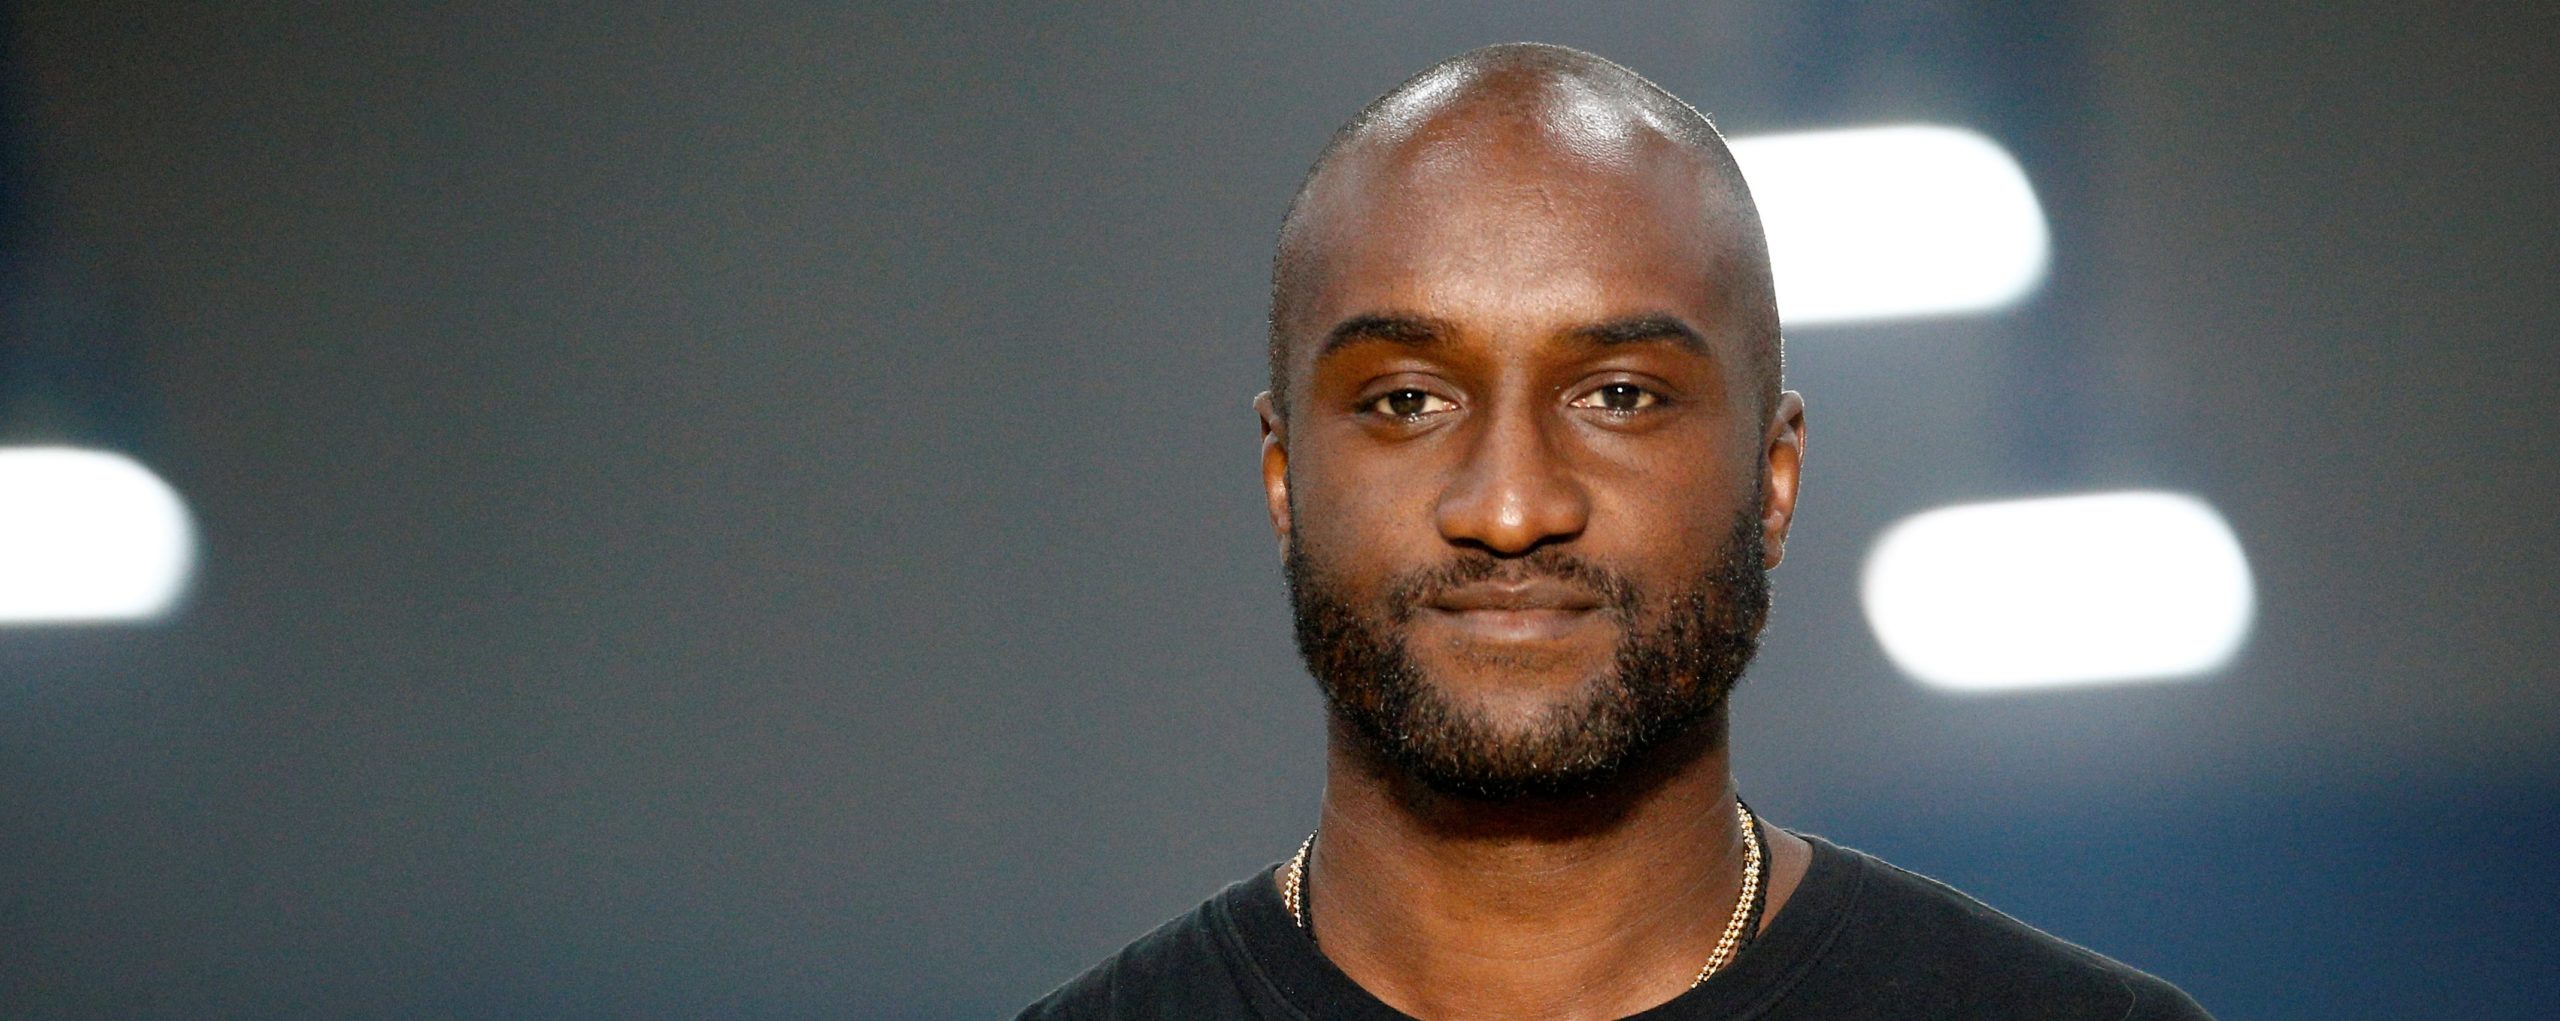 Virgil Abloh And Mercedes Maybach Collaboration Honours One Of The Greatest  Fashion Designers Of Our Time